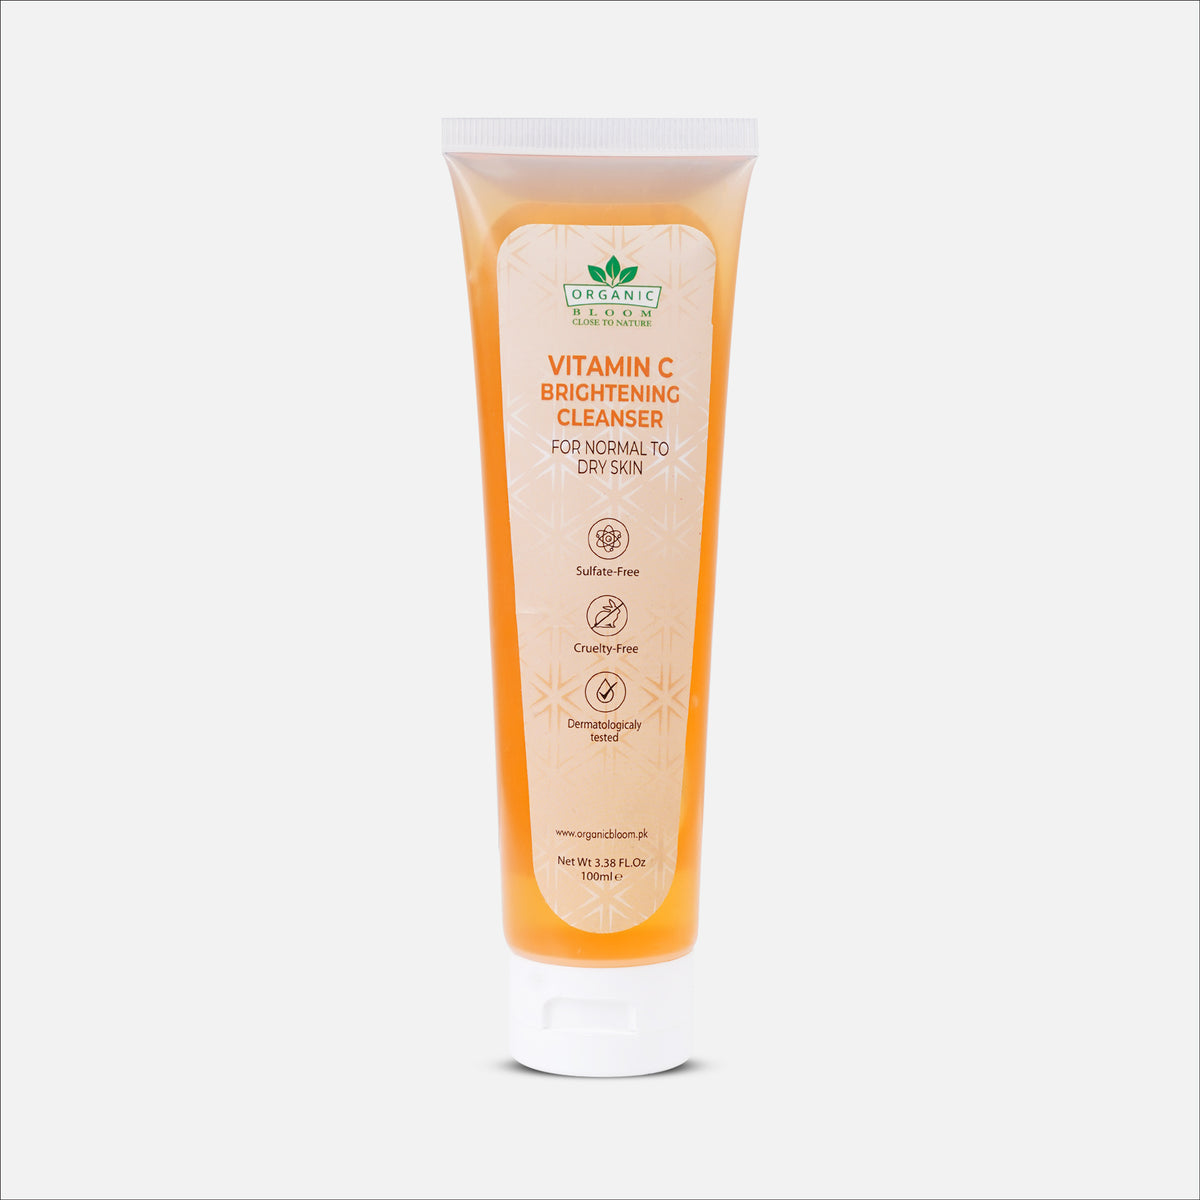 VITAMIN C BRIGHTENING CLEANSER FOR NORMAL TO DRY SKIN